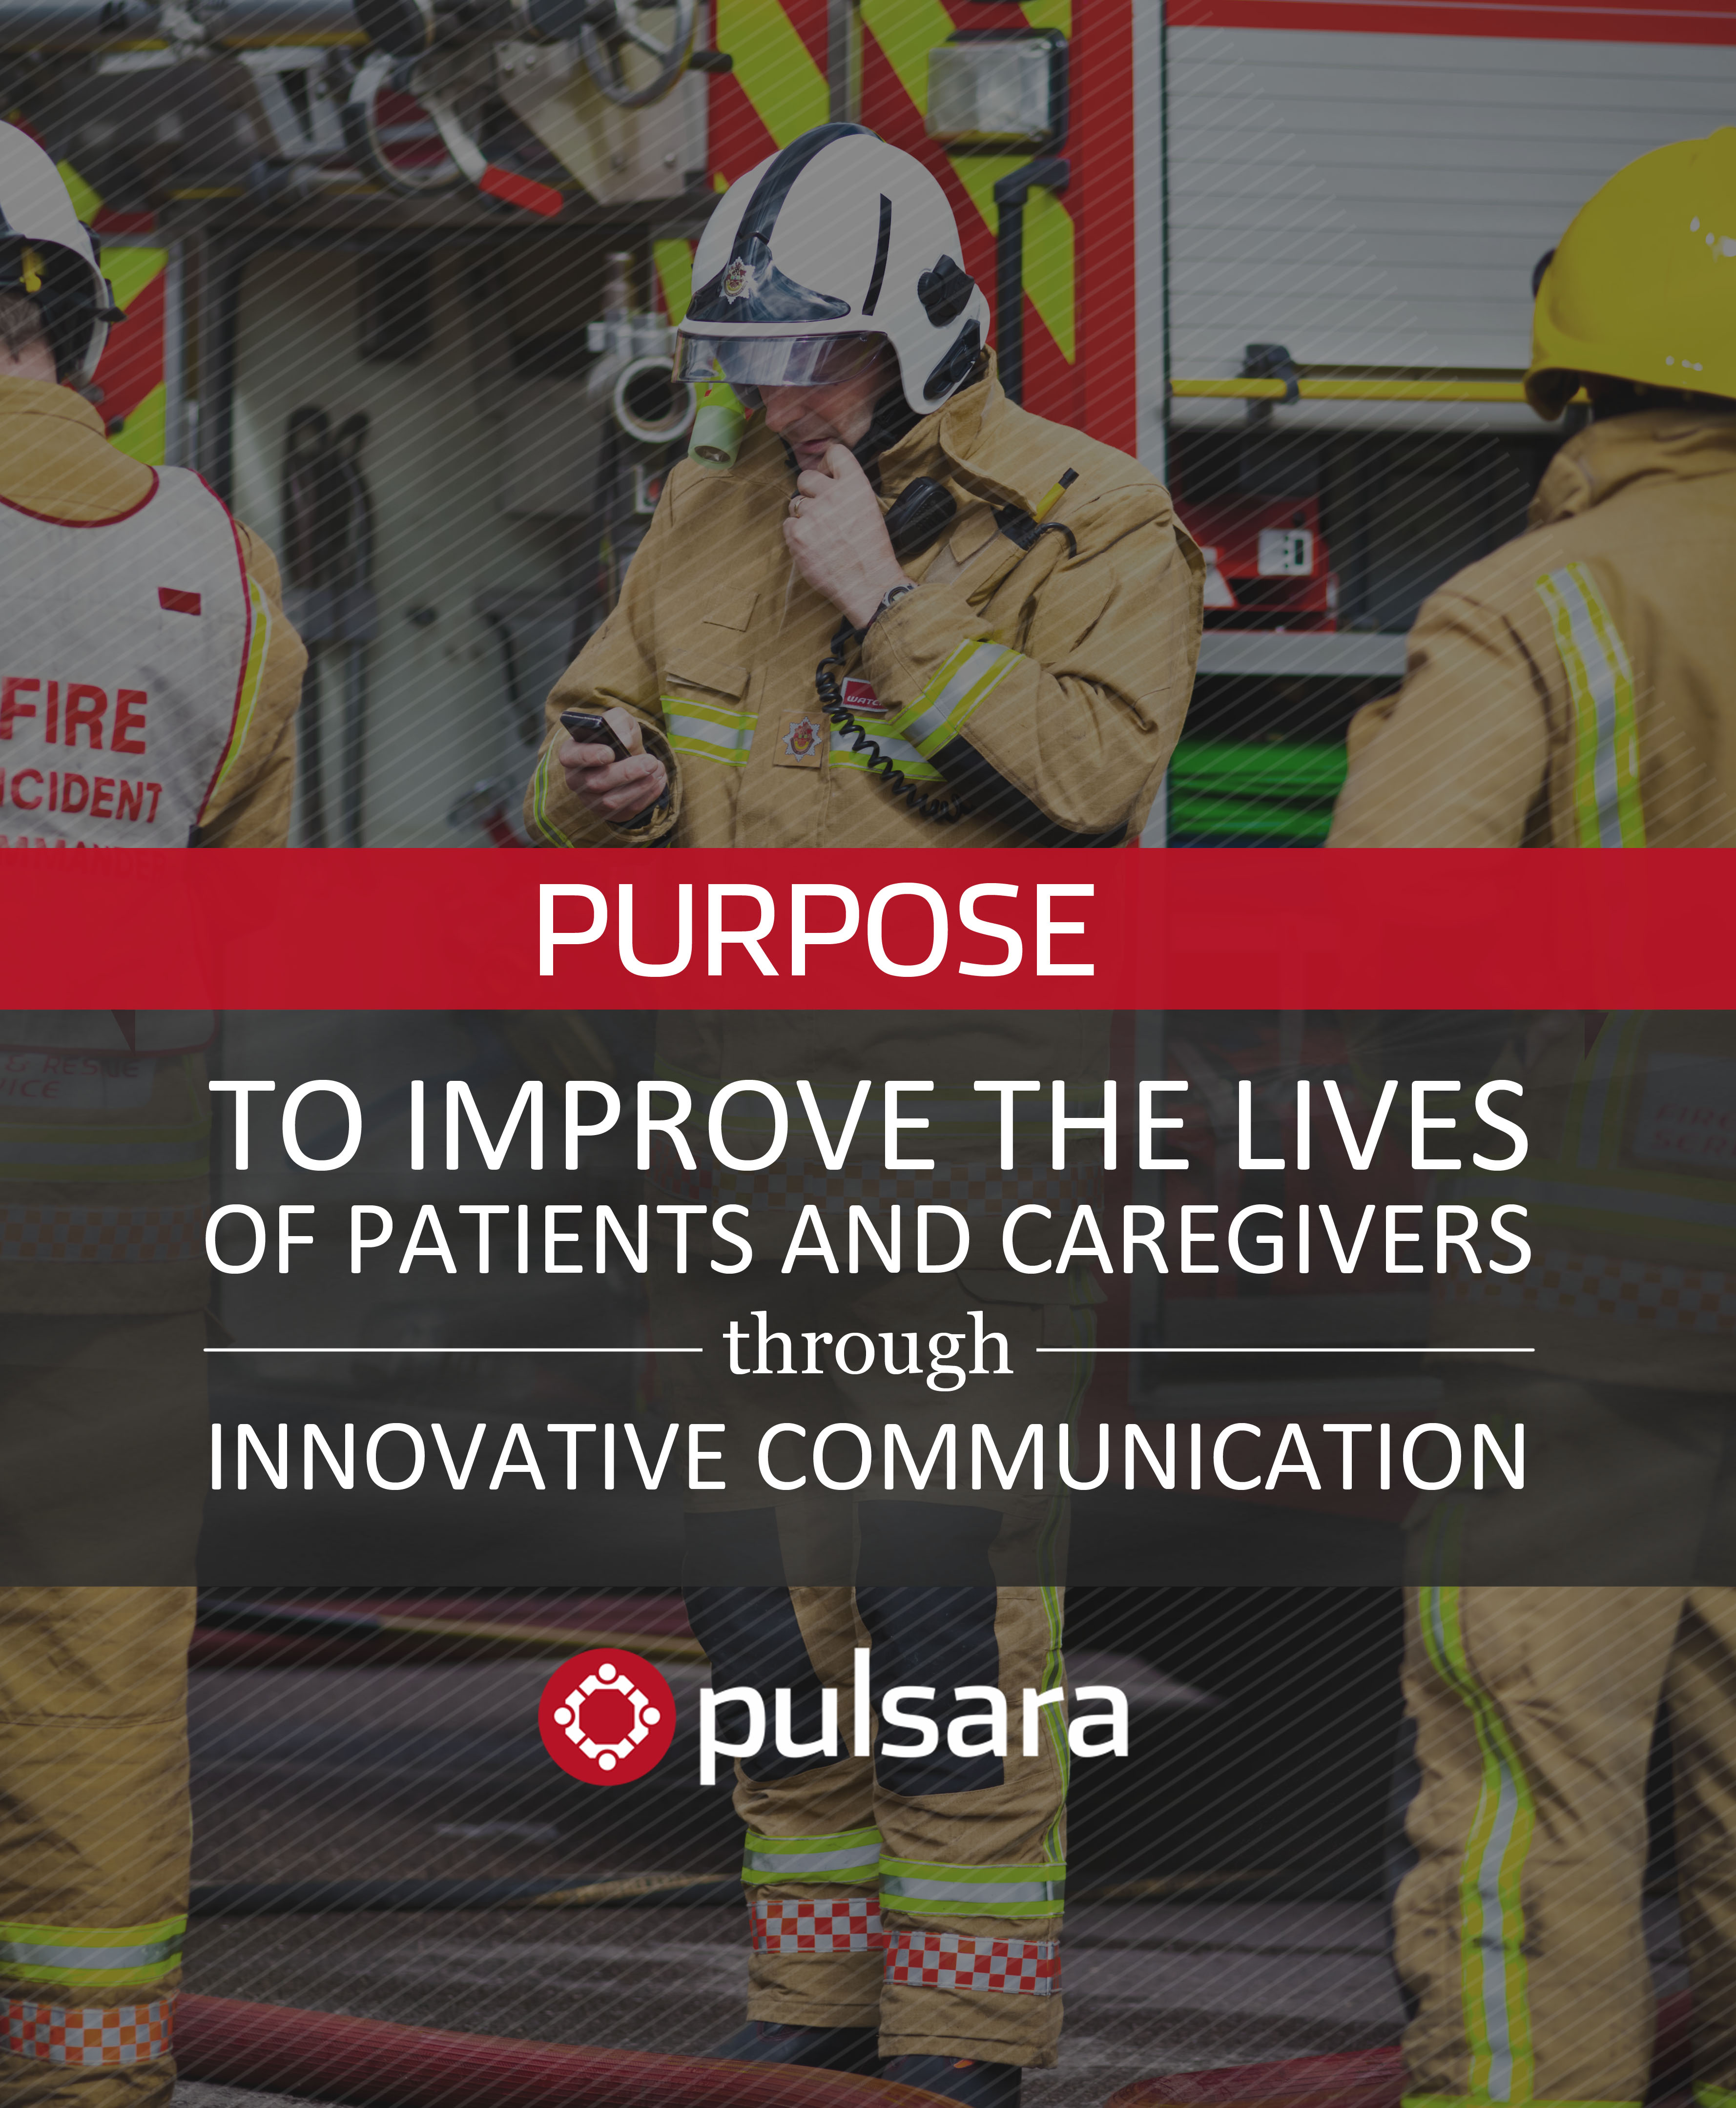 Reflections from Pulsara's CEO: Driven by Purpose